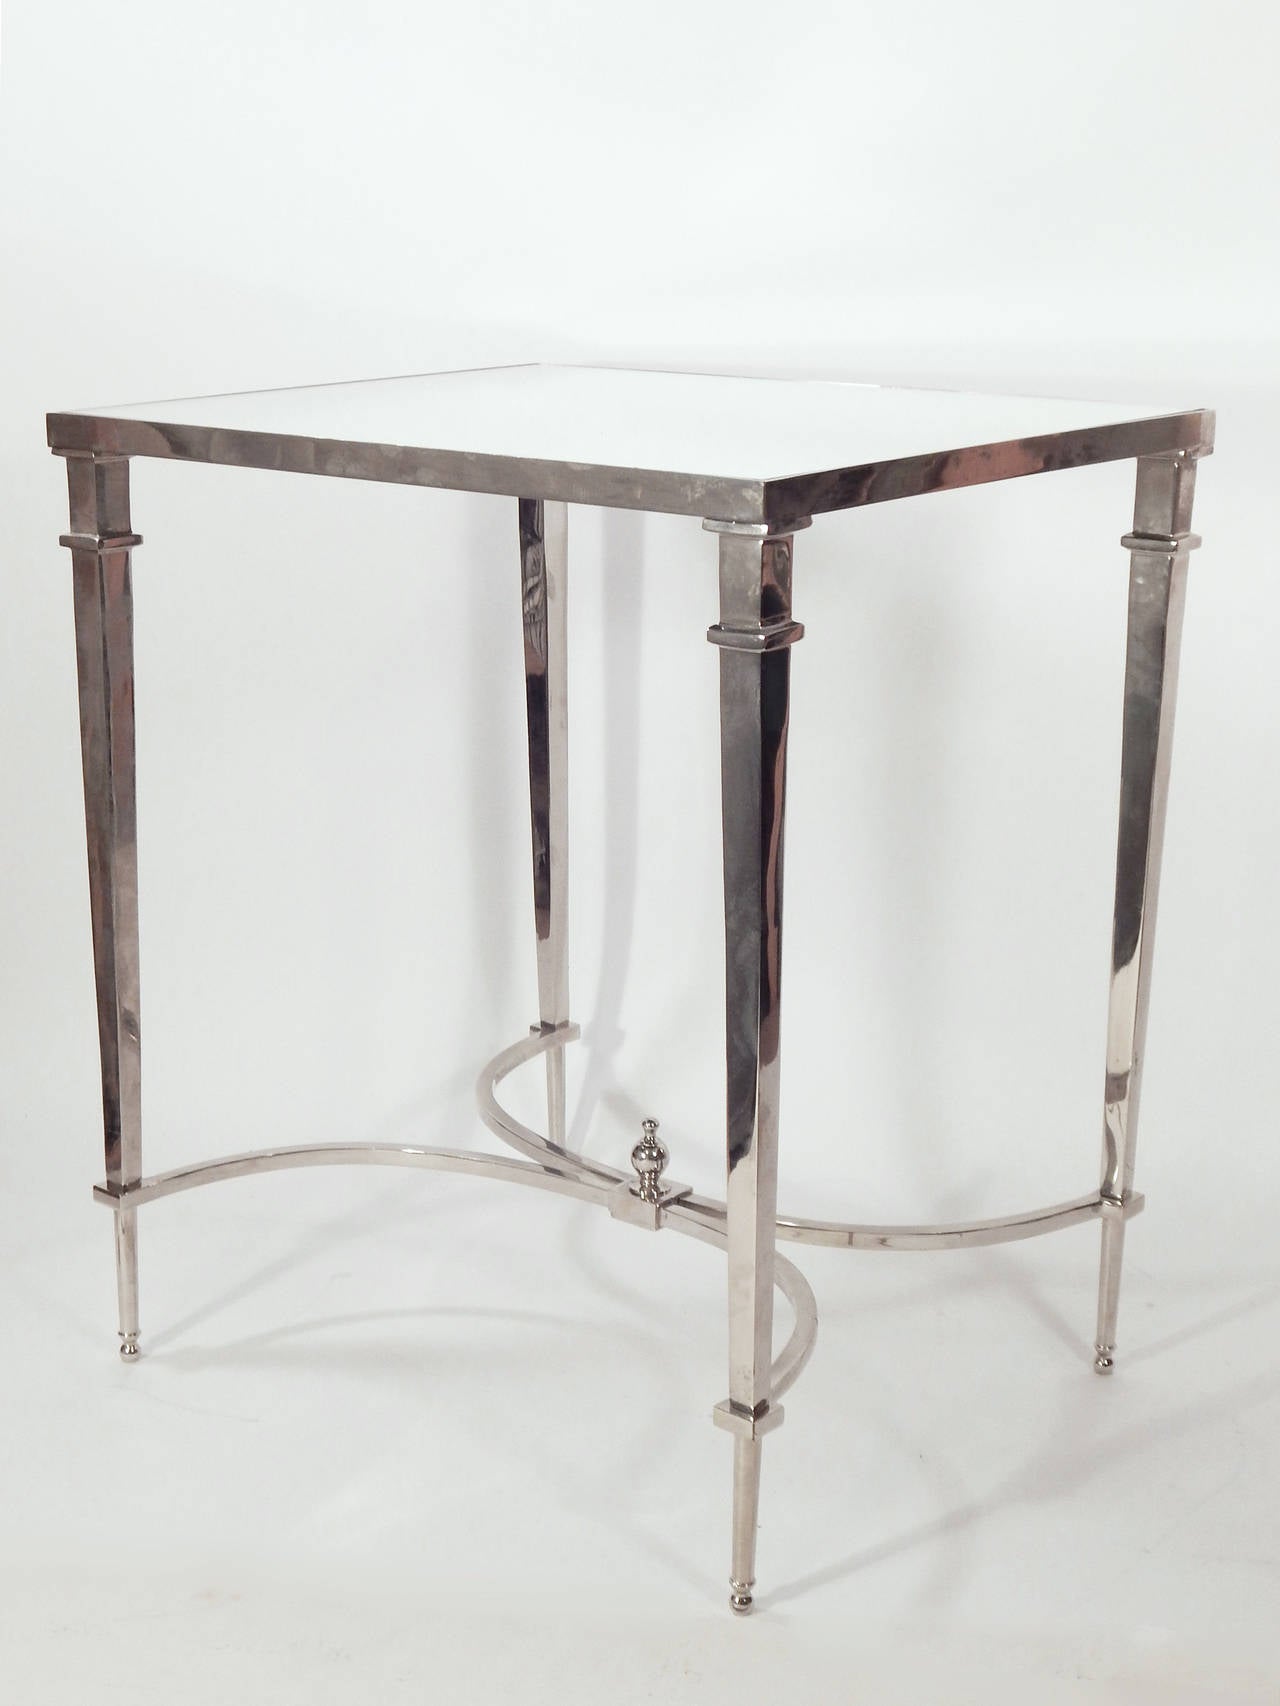 20th Century Pair of Mirrored End Tables